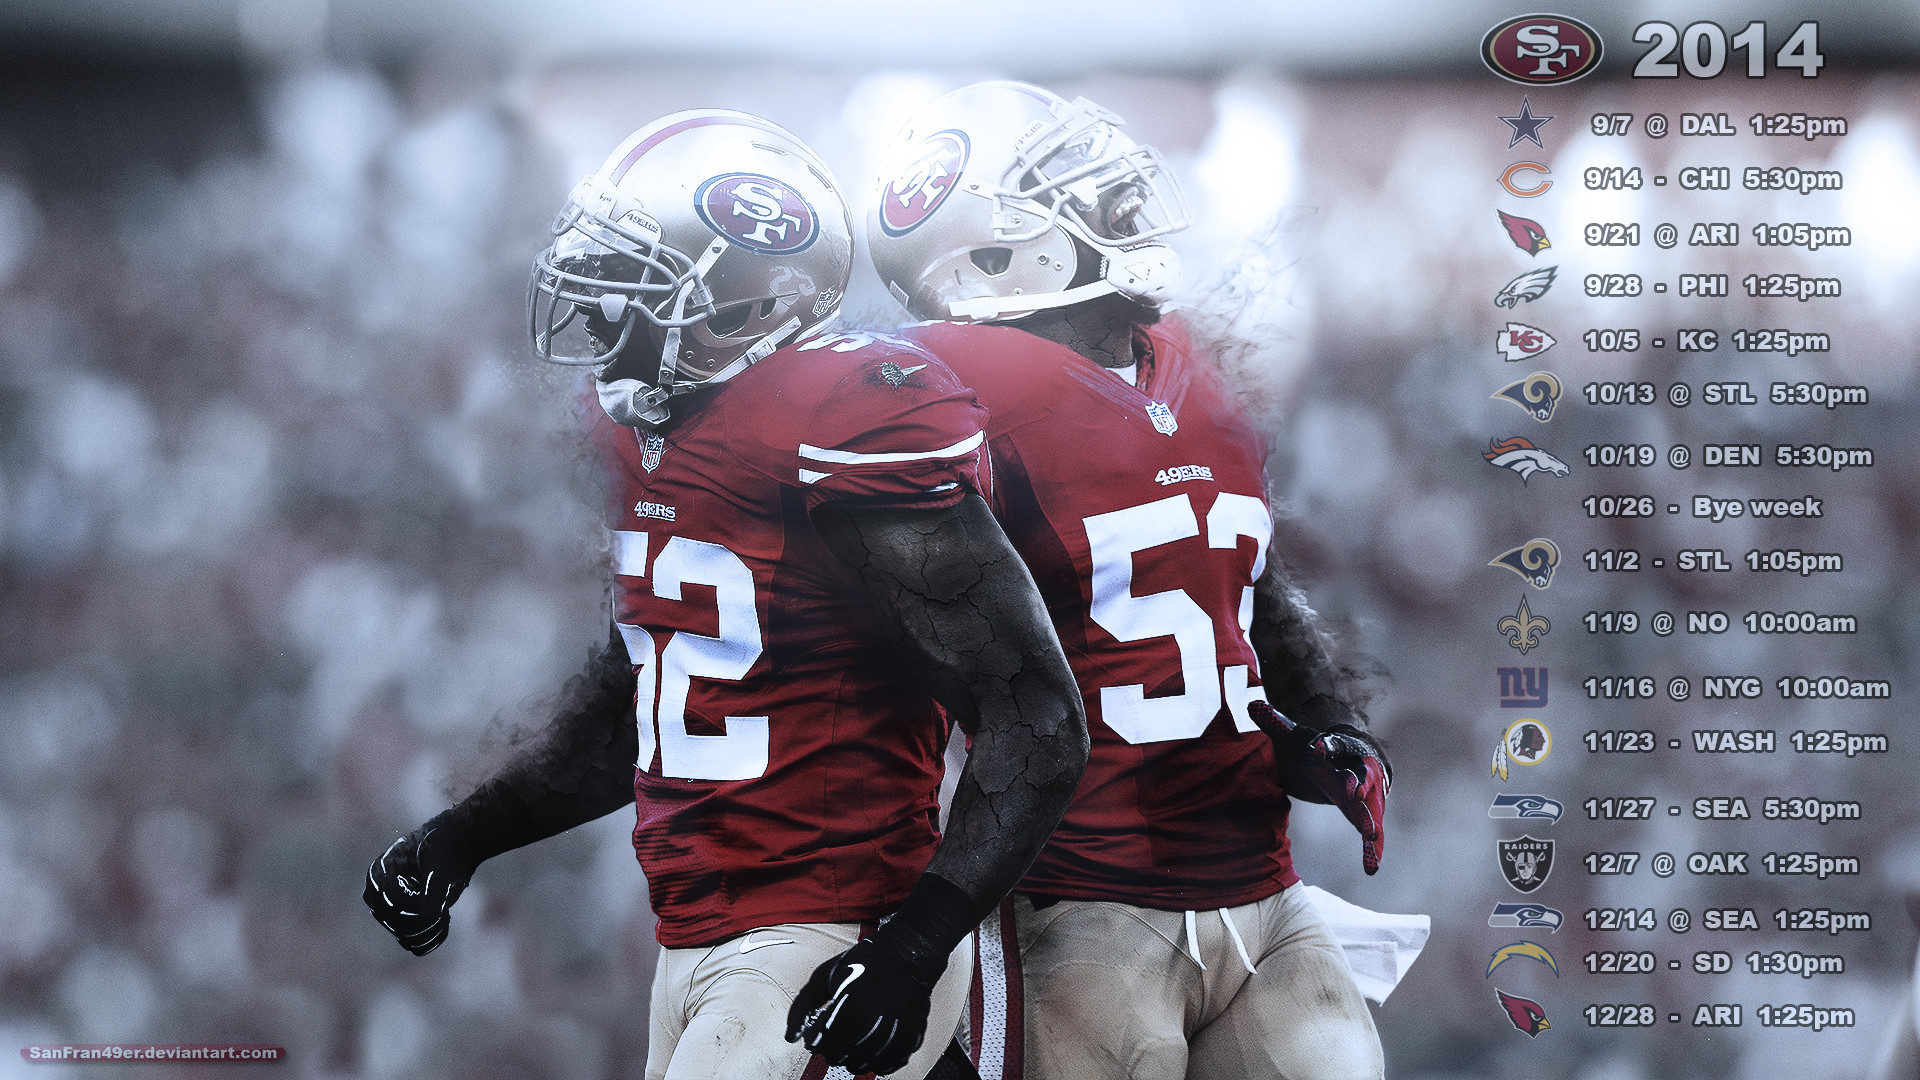 1920x1080 ... San Francisco 49ers Wallpaper 2014 Schedule(PST) By SanFran49er On  Amazing Sf 49Ers 2014